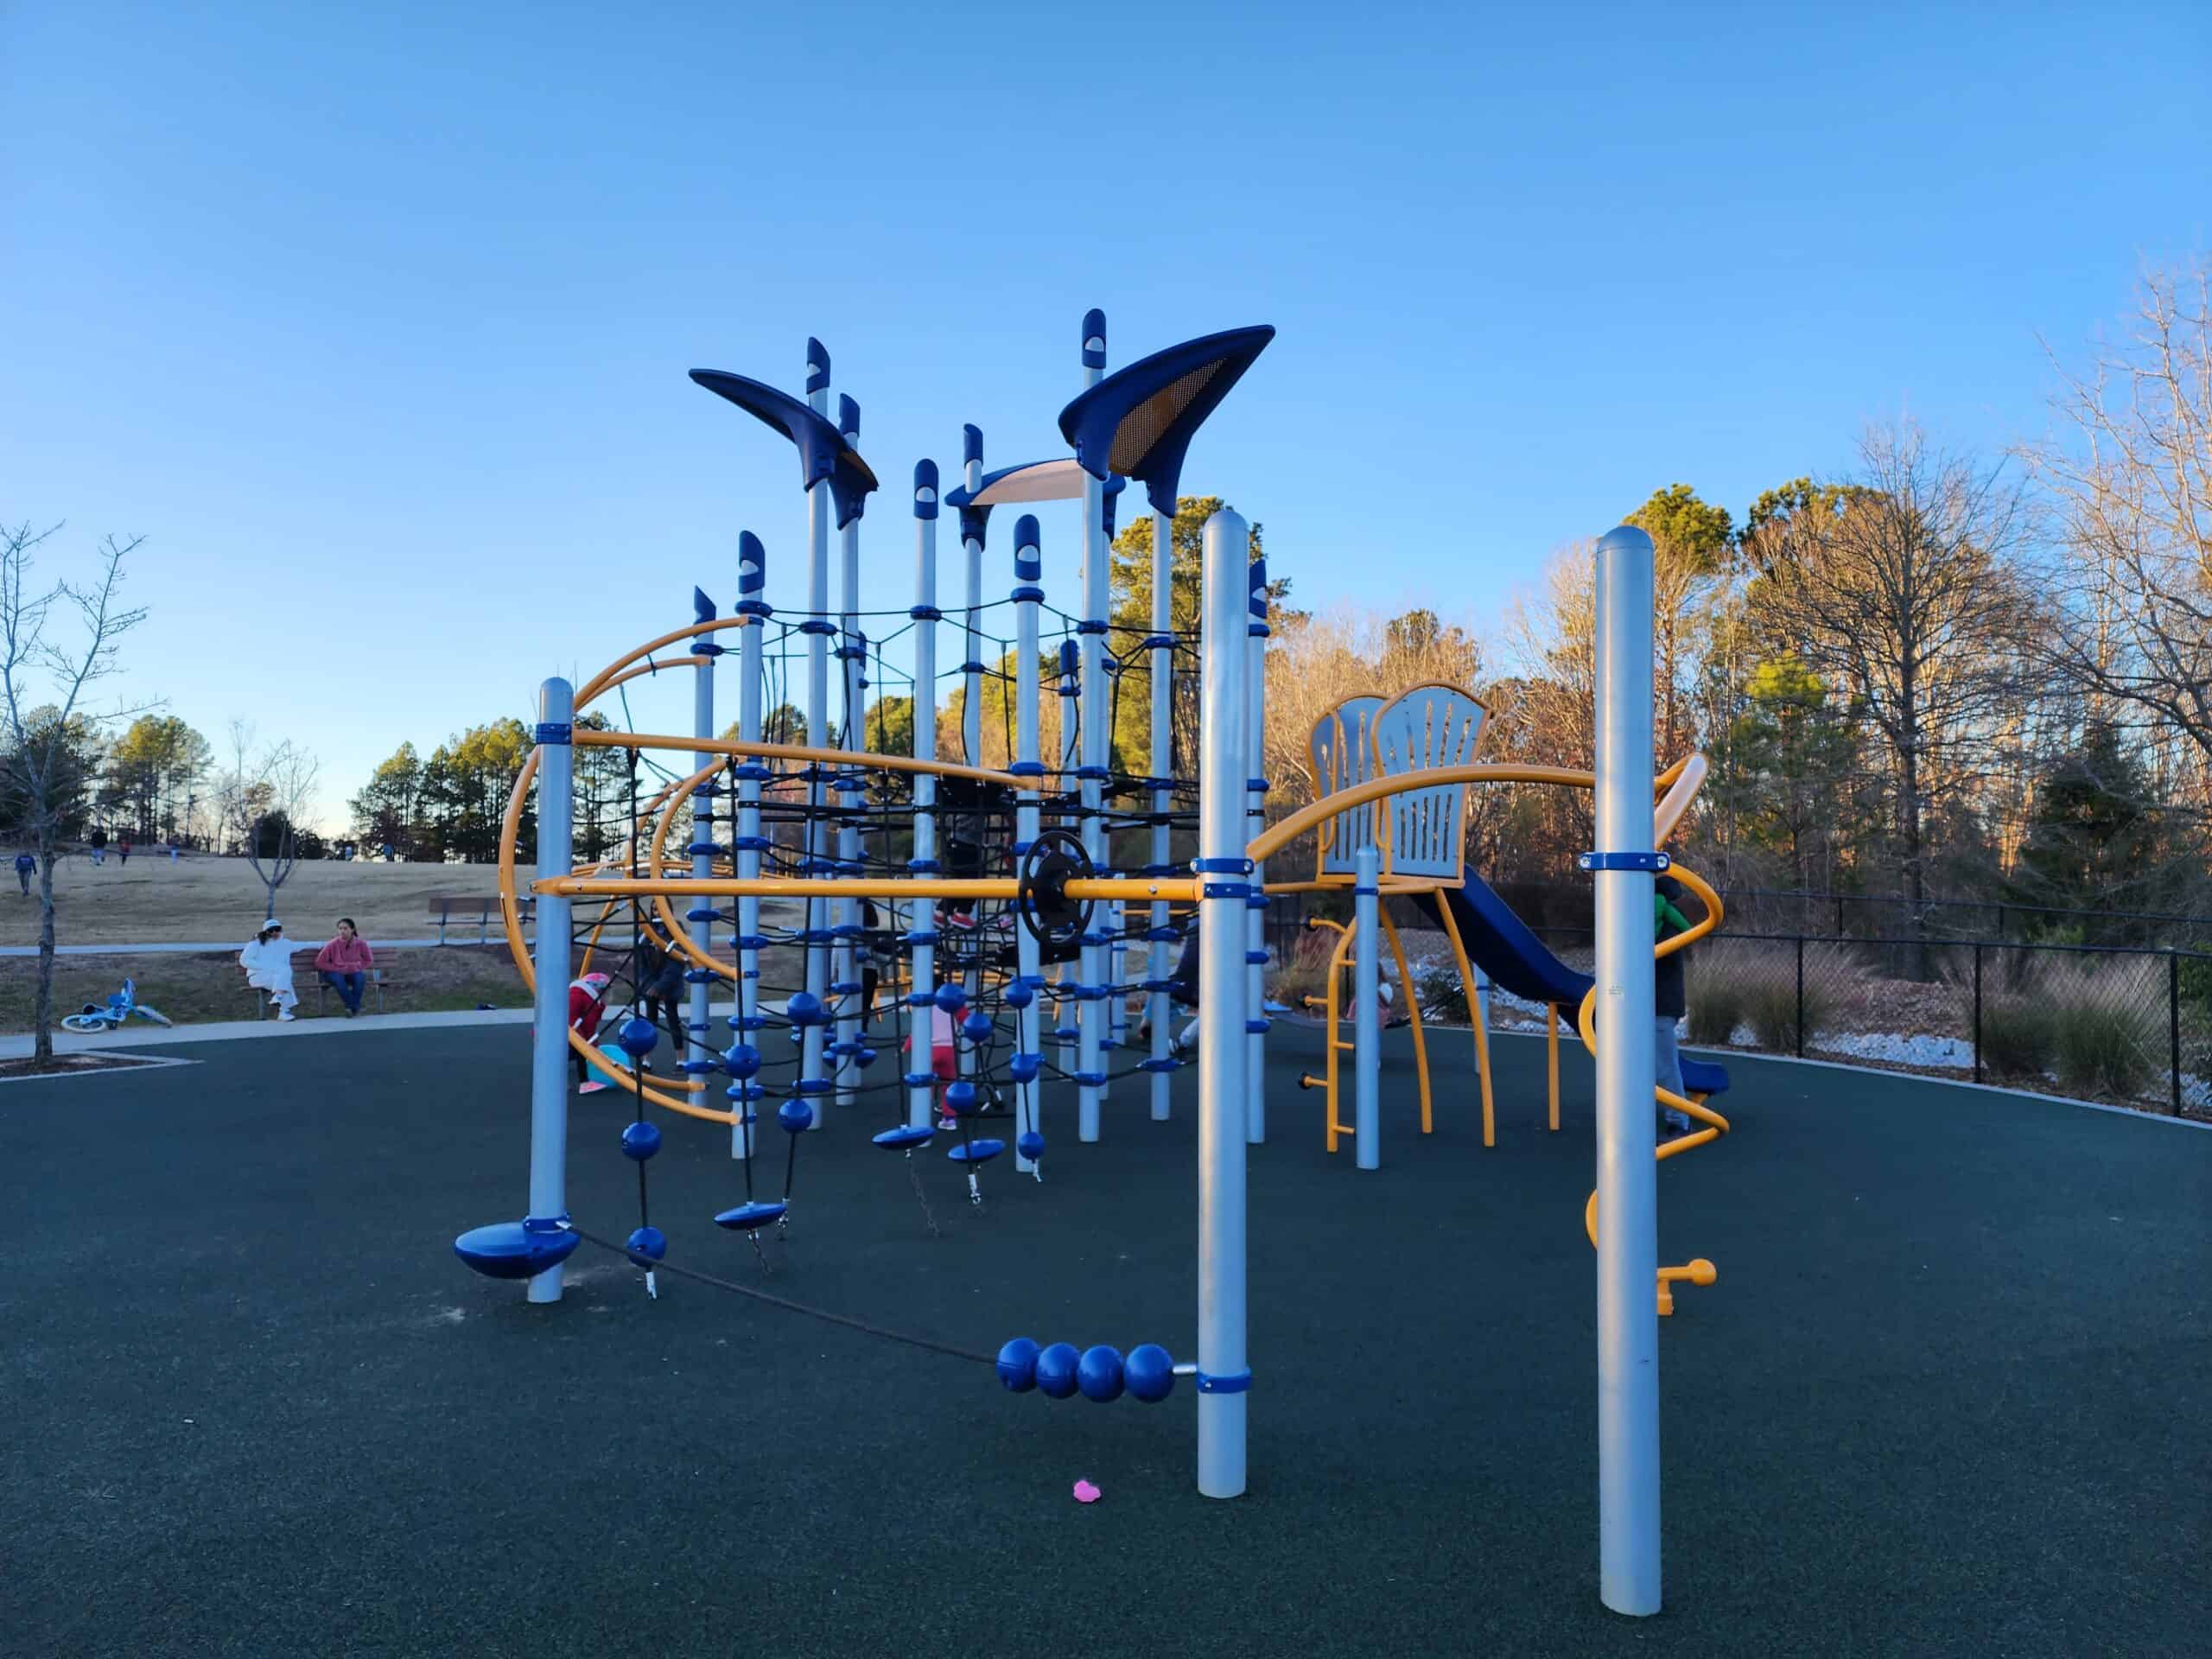 A vibrant playground at Northwest Park, Morrisville, NC, with children playing in the background. The main structure features blue and yellow climbing equipment, including slides and interactive play panels. The playground's rubber surface ensures safety, and the surrounding open grassy areas invite active play in a community-friendly environment.